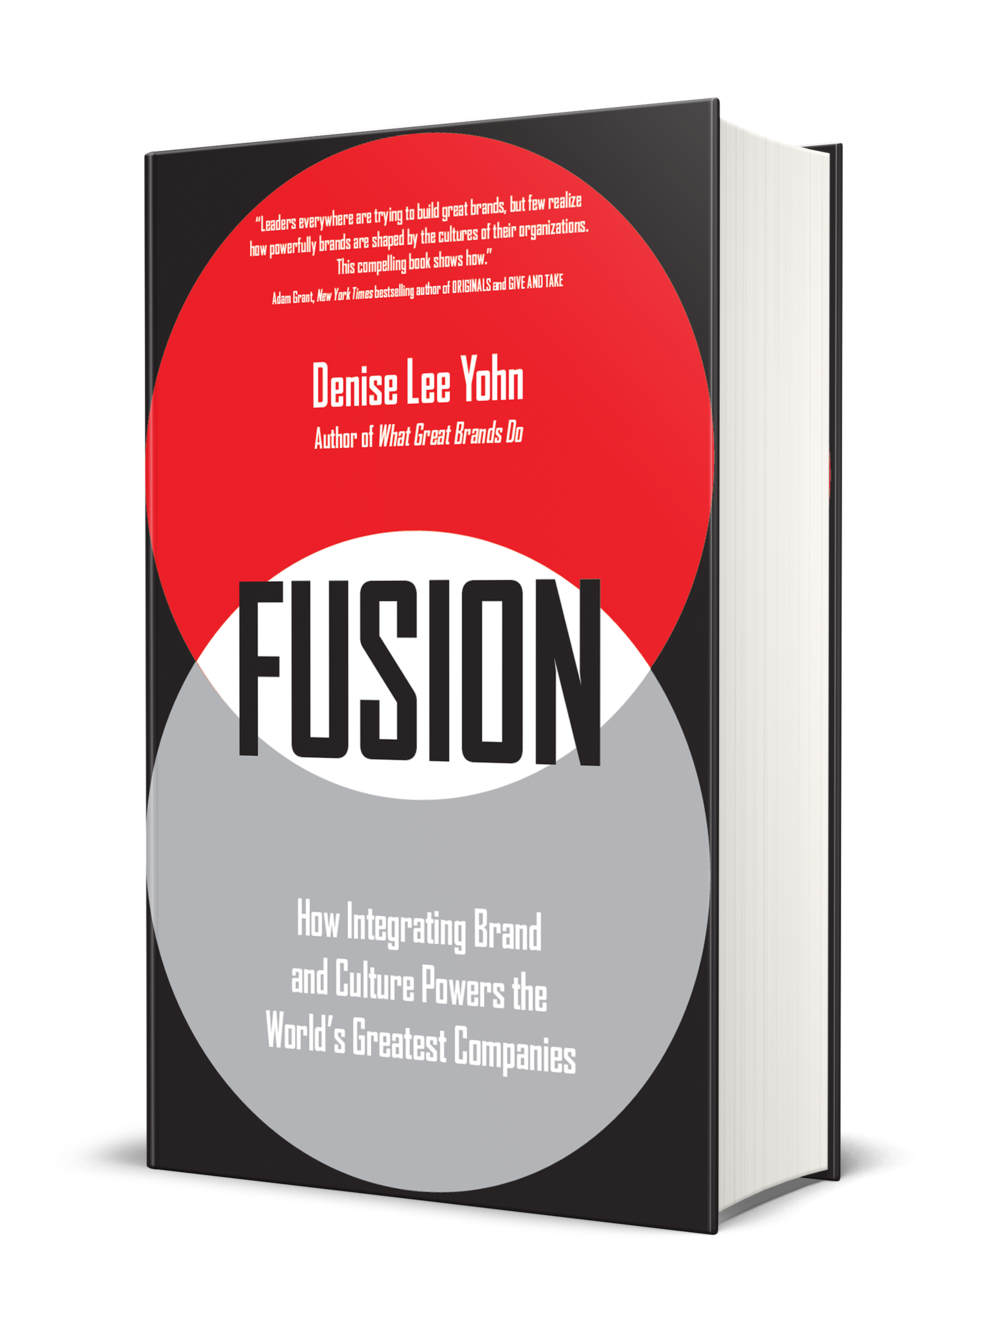  Front cover of Fusion: How Integrating Brand and Culture Powers the World's Greatest Companies, by Denise Lee Yohn 